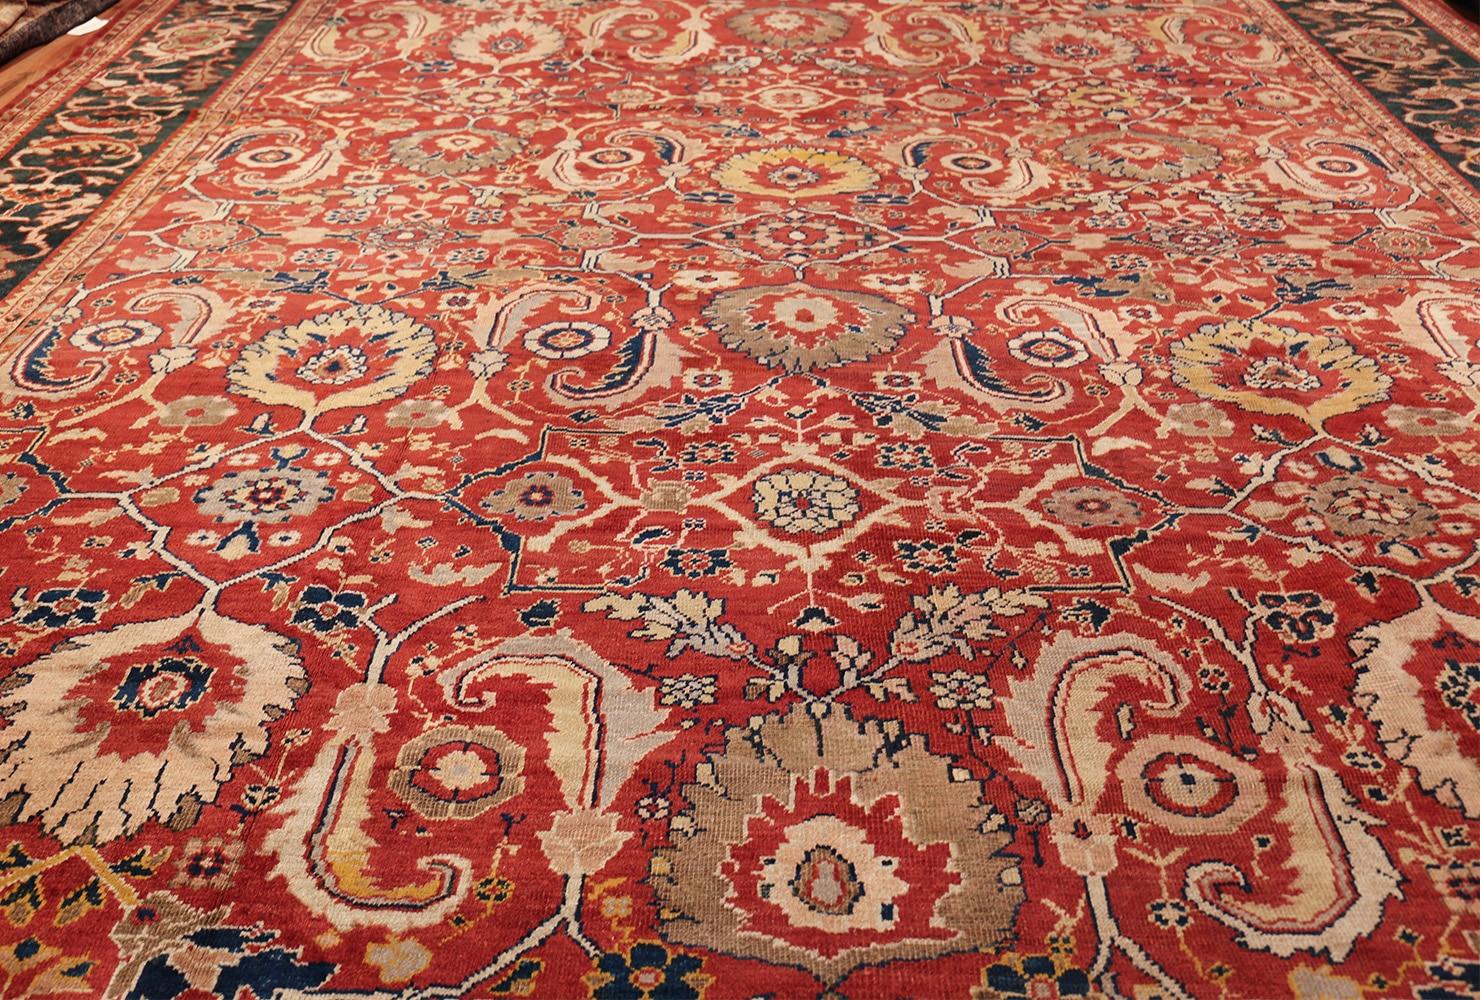 Large Scale With An All Over Design Antique Persian Sultanabad Rug, Country of Origin / Rug Type: Antique Persian Rug, Date: Antique Rug Circa 1900. Size: 13 ft 7 in x 17 ft (4.14 m x 5.18 m)

